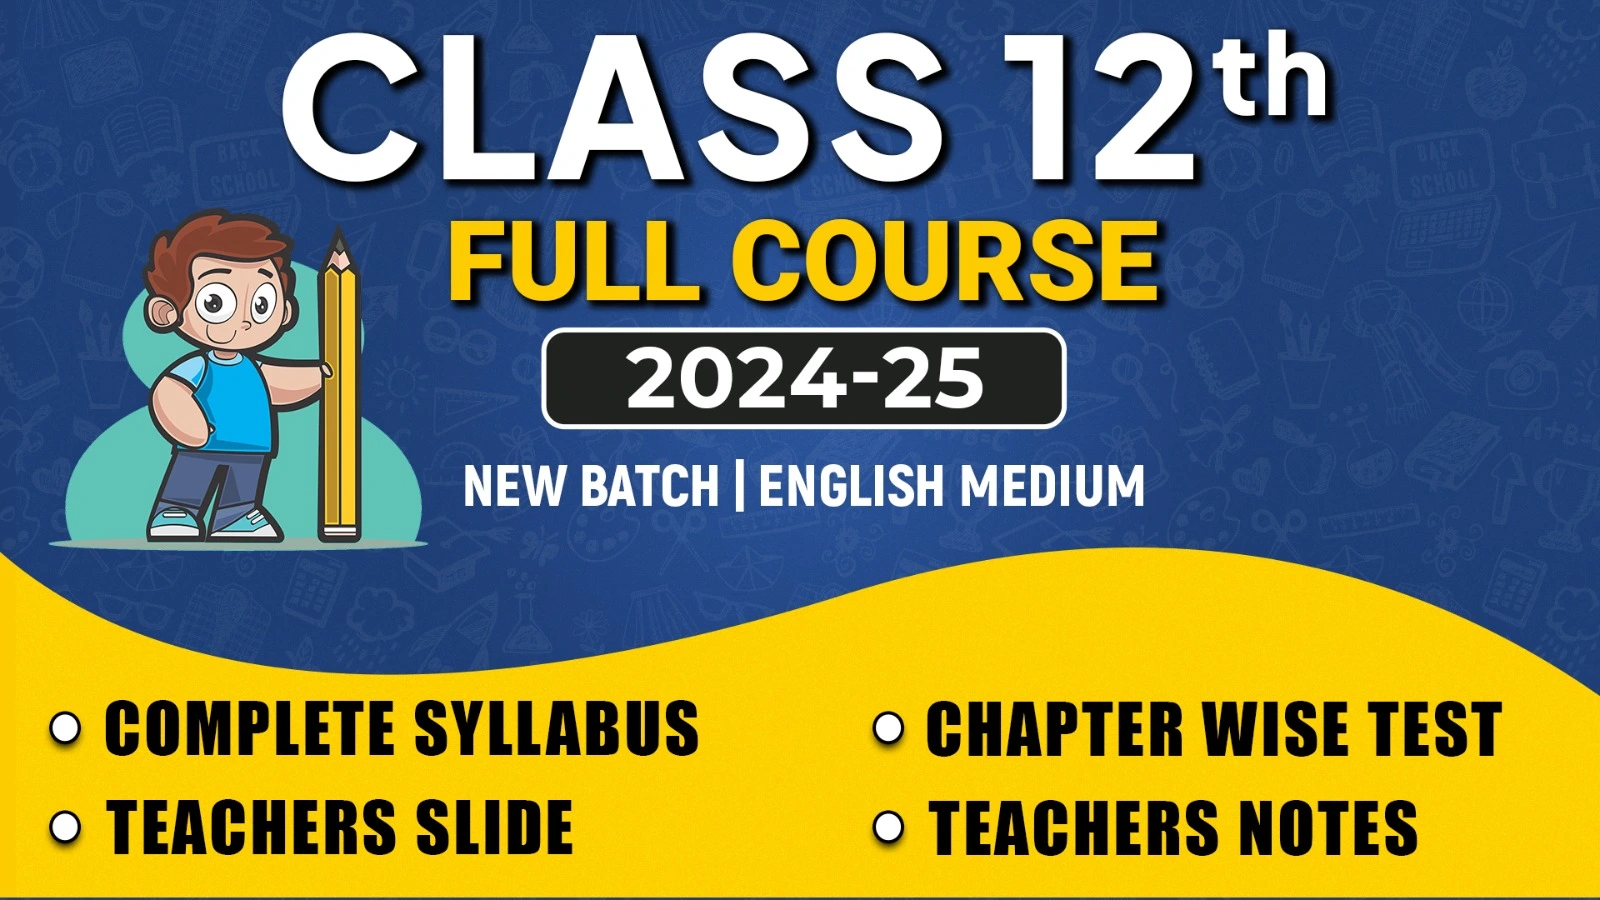 Class 12th Full Course (2024) | UP Board | English Medium | TOPPERS Batch